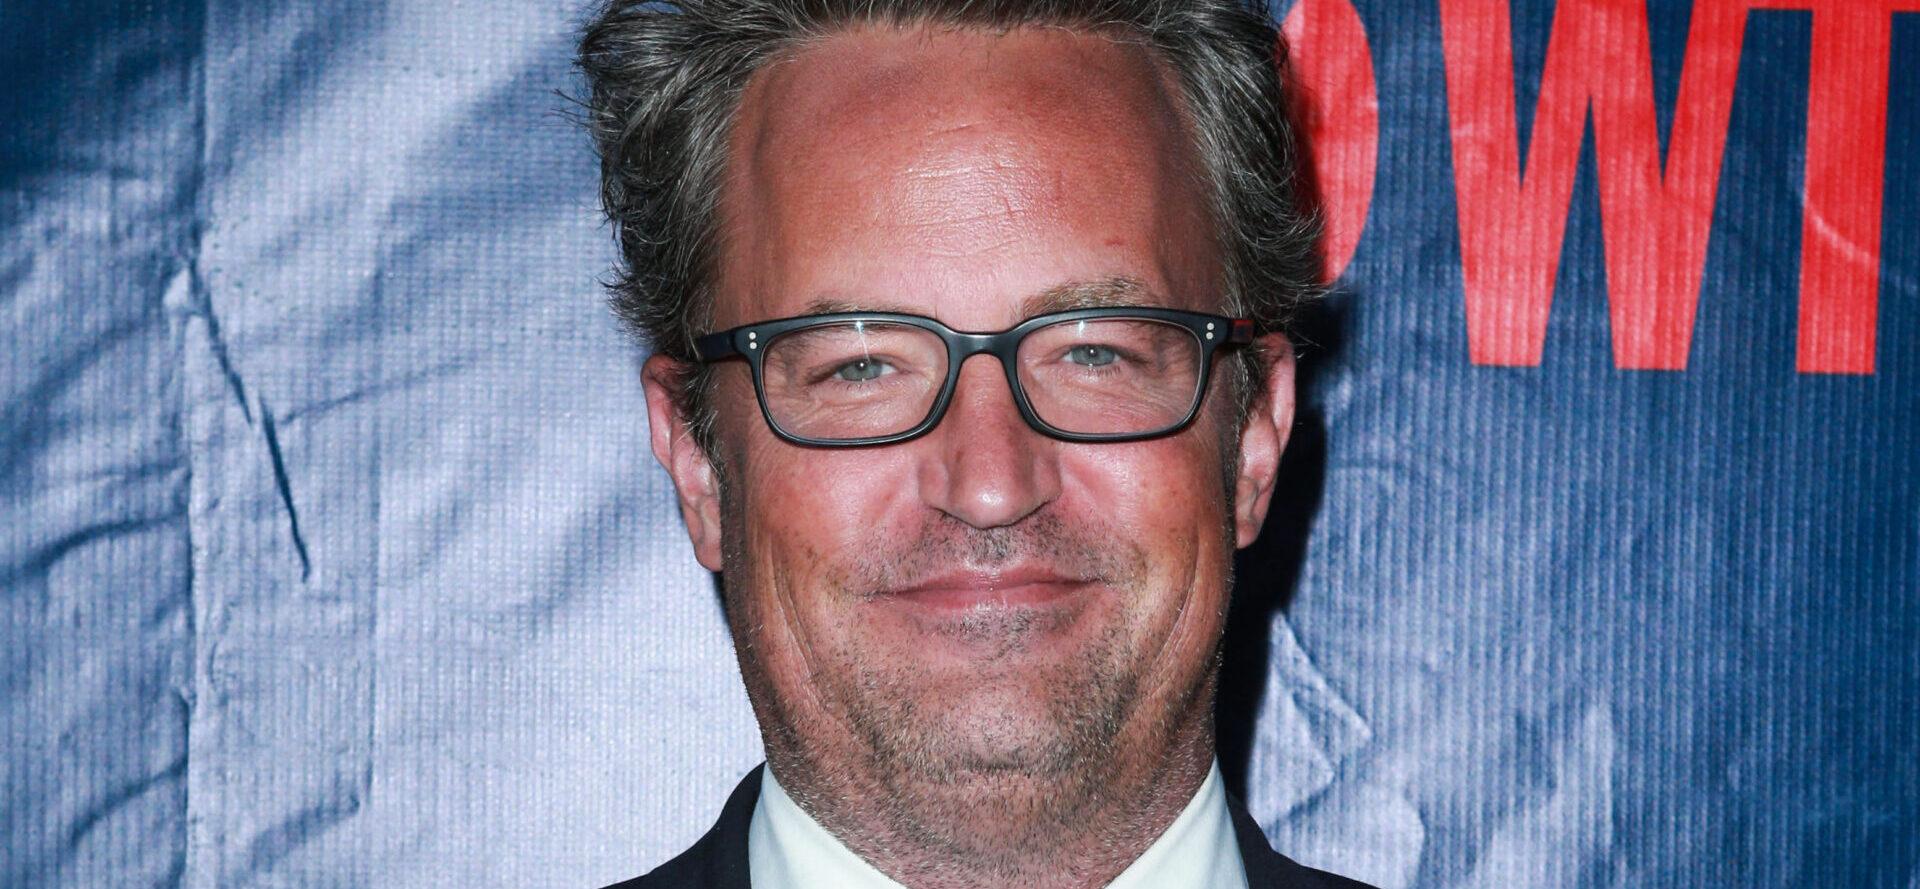 Matthew Perry's Family Breaks Silence On His 'Tragic' Death